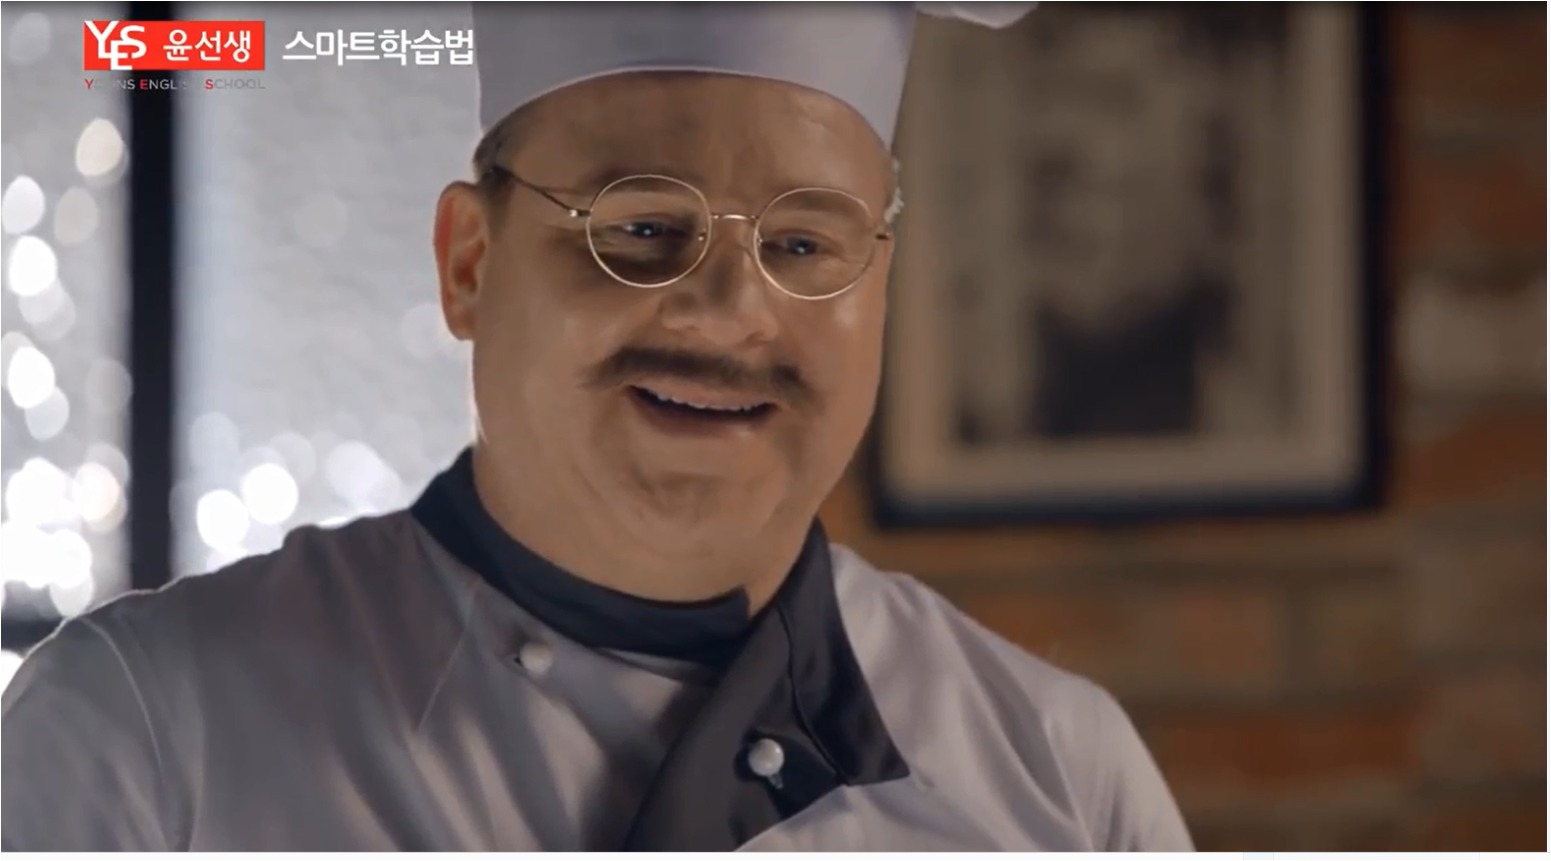 Still of Dean Dawson as a Chef in a commercial for Yoon's English.